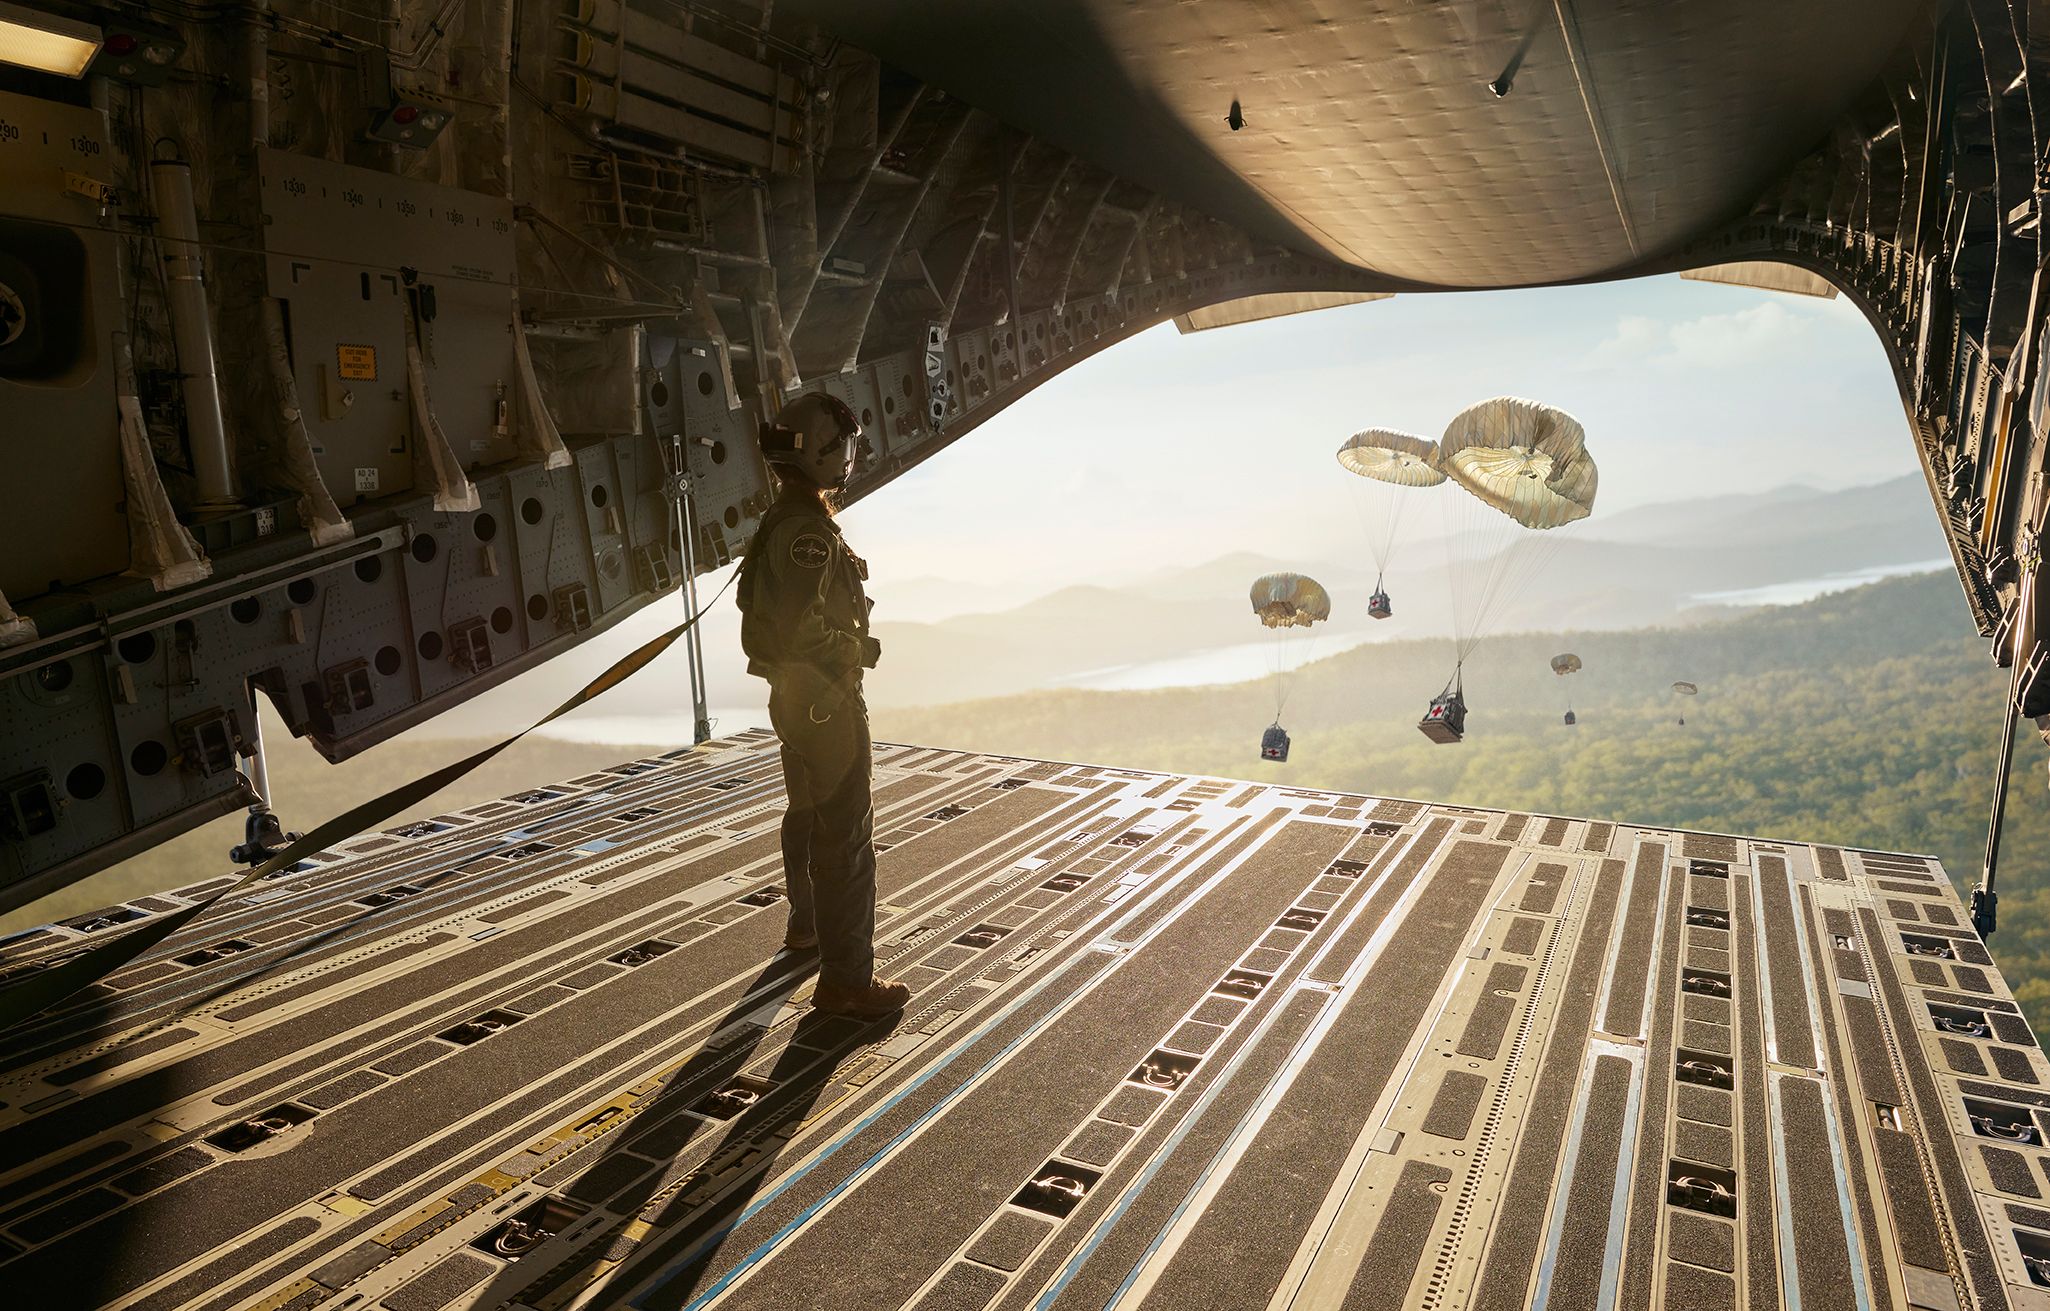 A member of the Air Force watches parachutes deploy out the back of a plane.